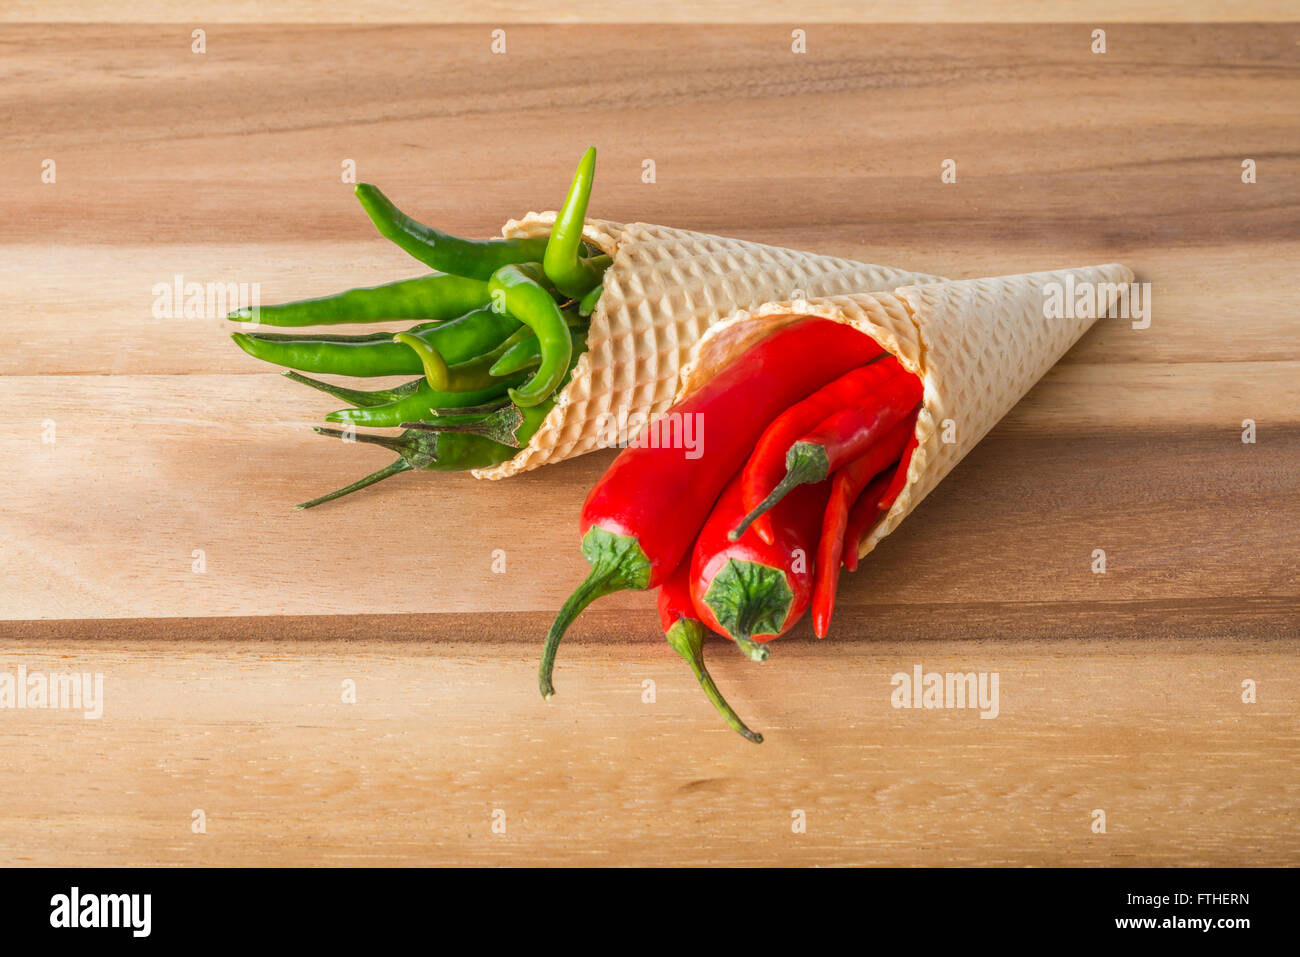 Red and green hot chili peppers in wafer cones on wooden background Stock Photo